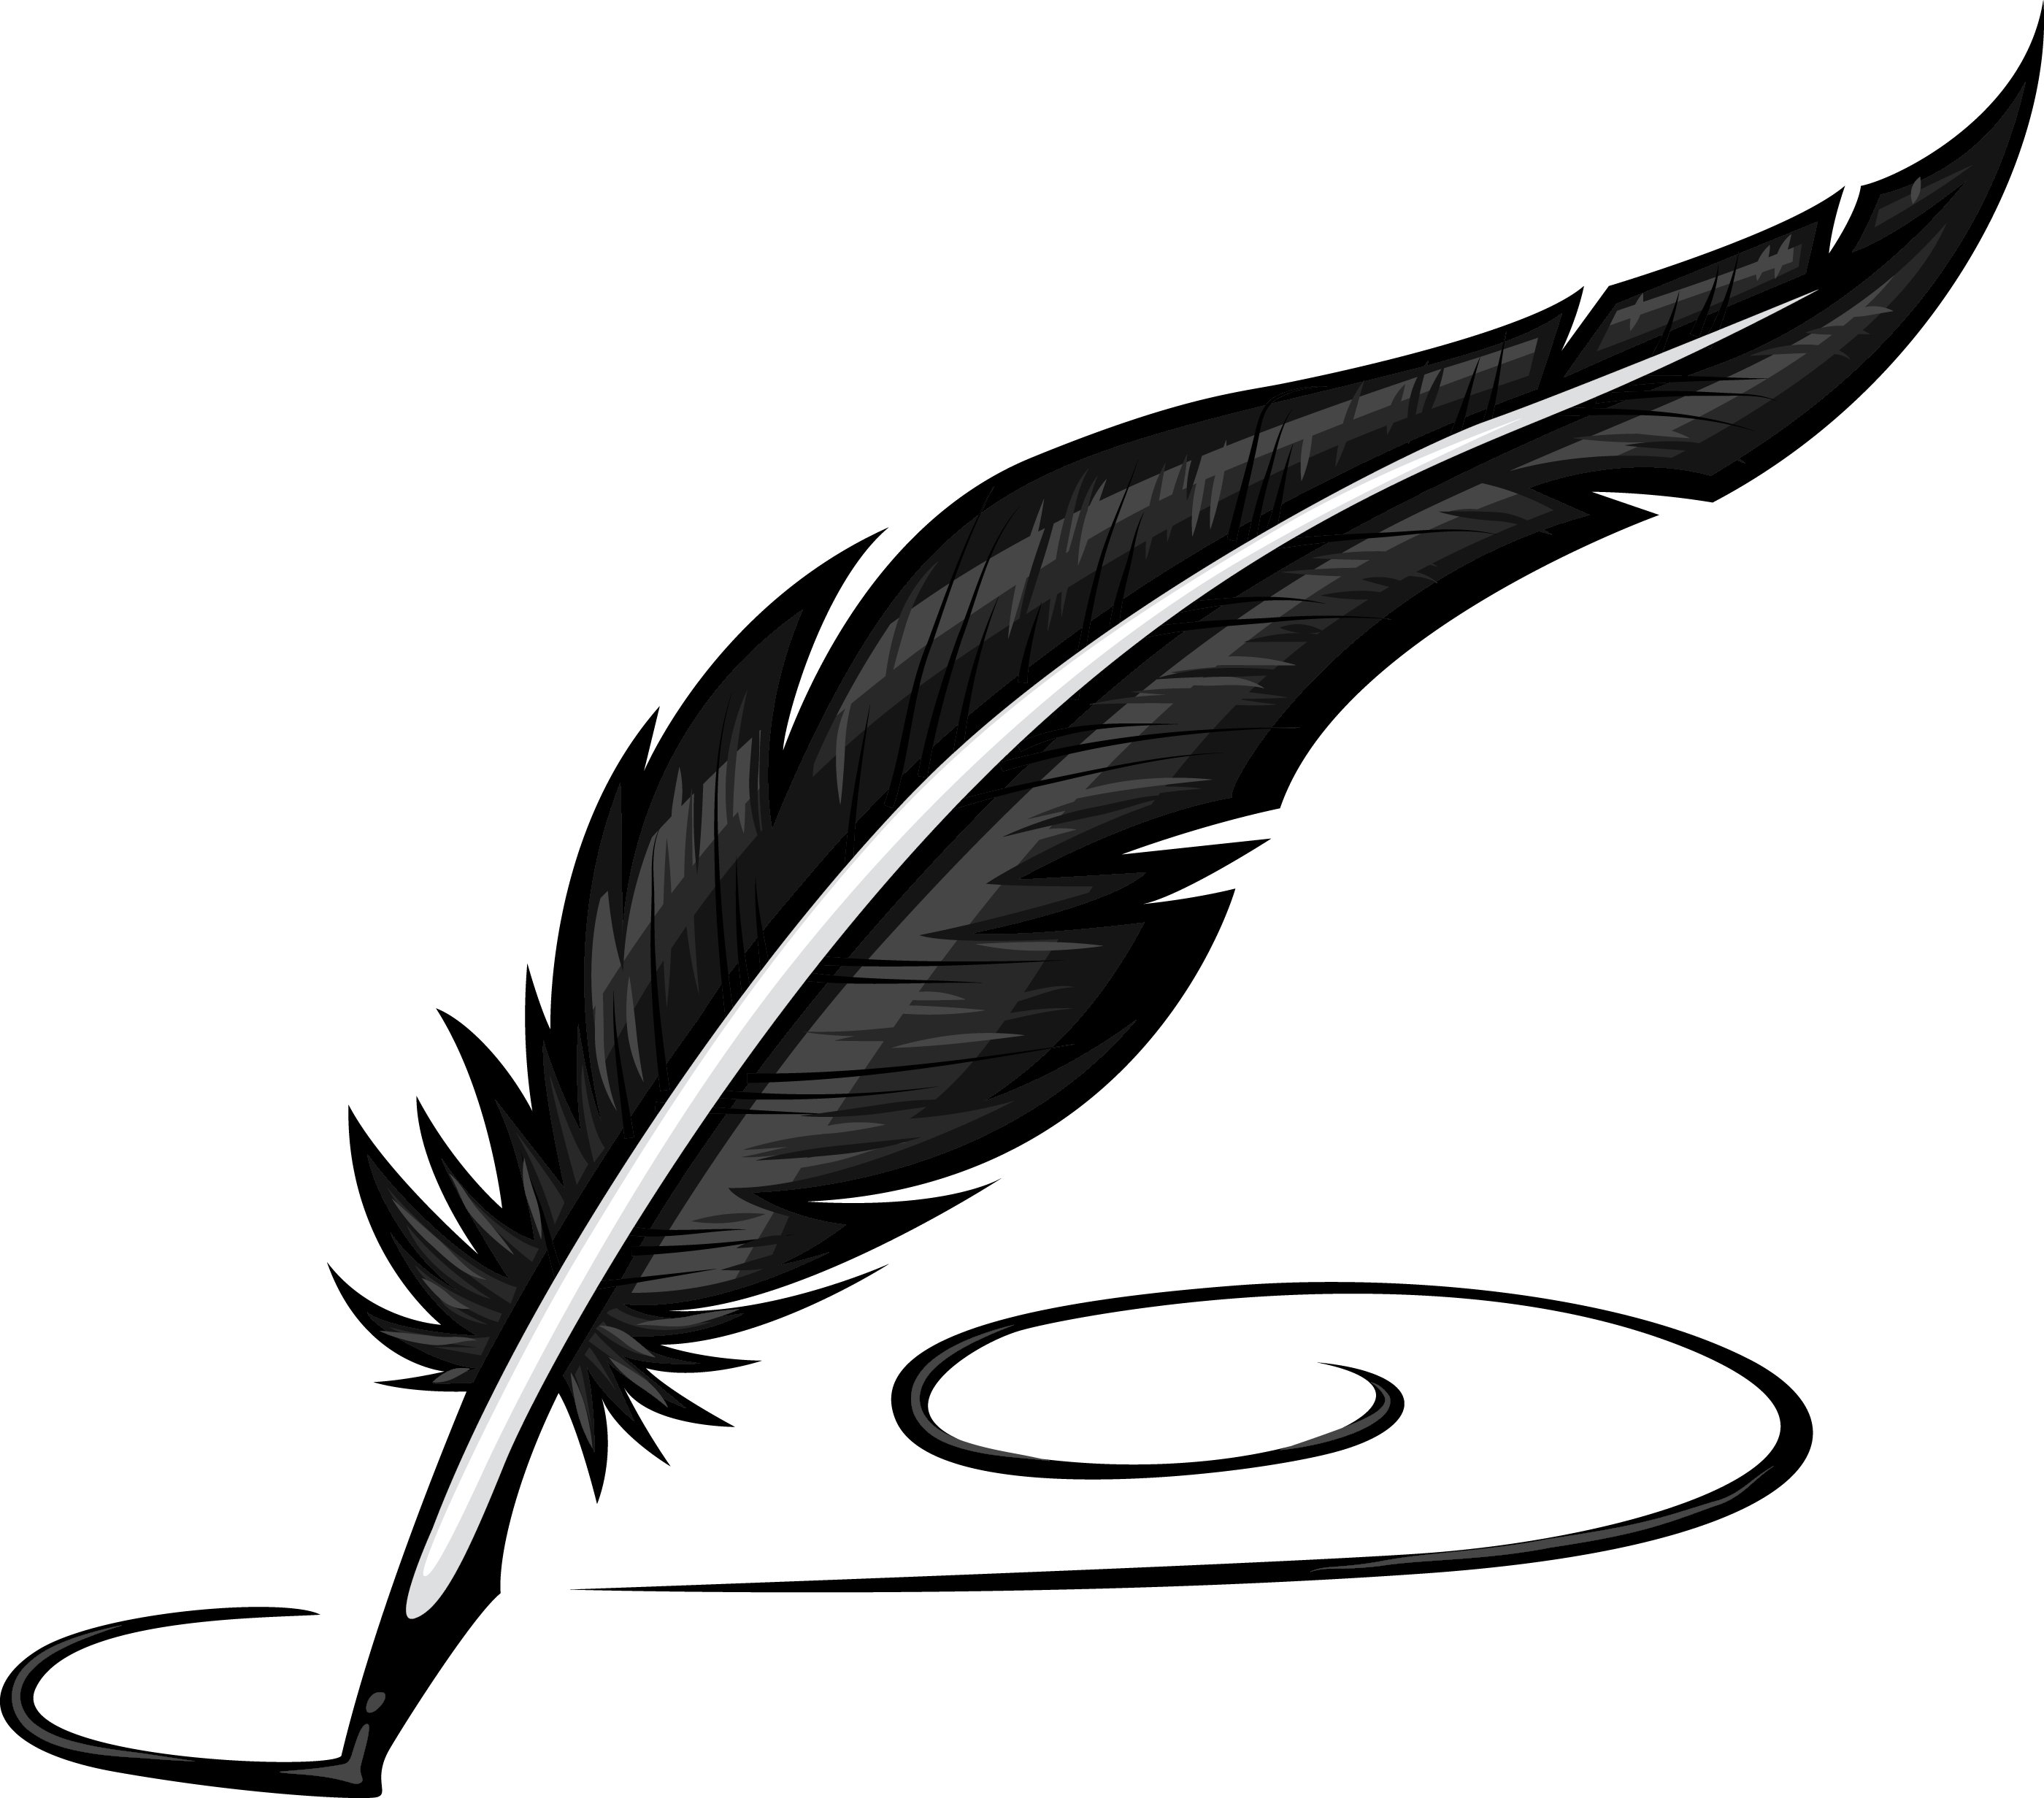 Feather pen clipart png